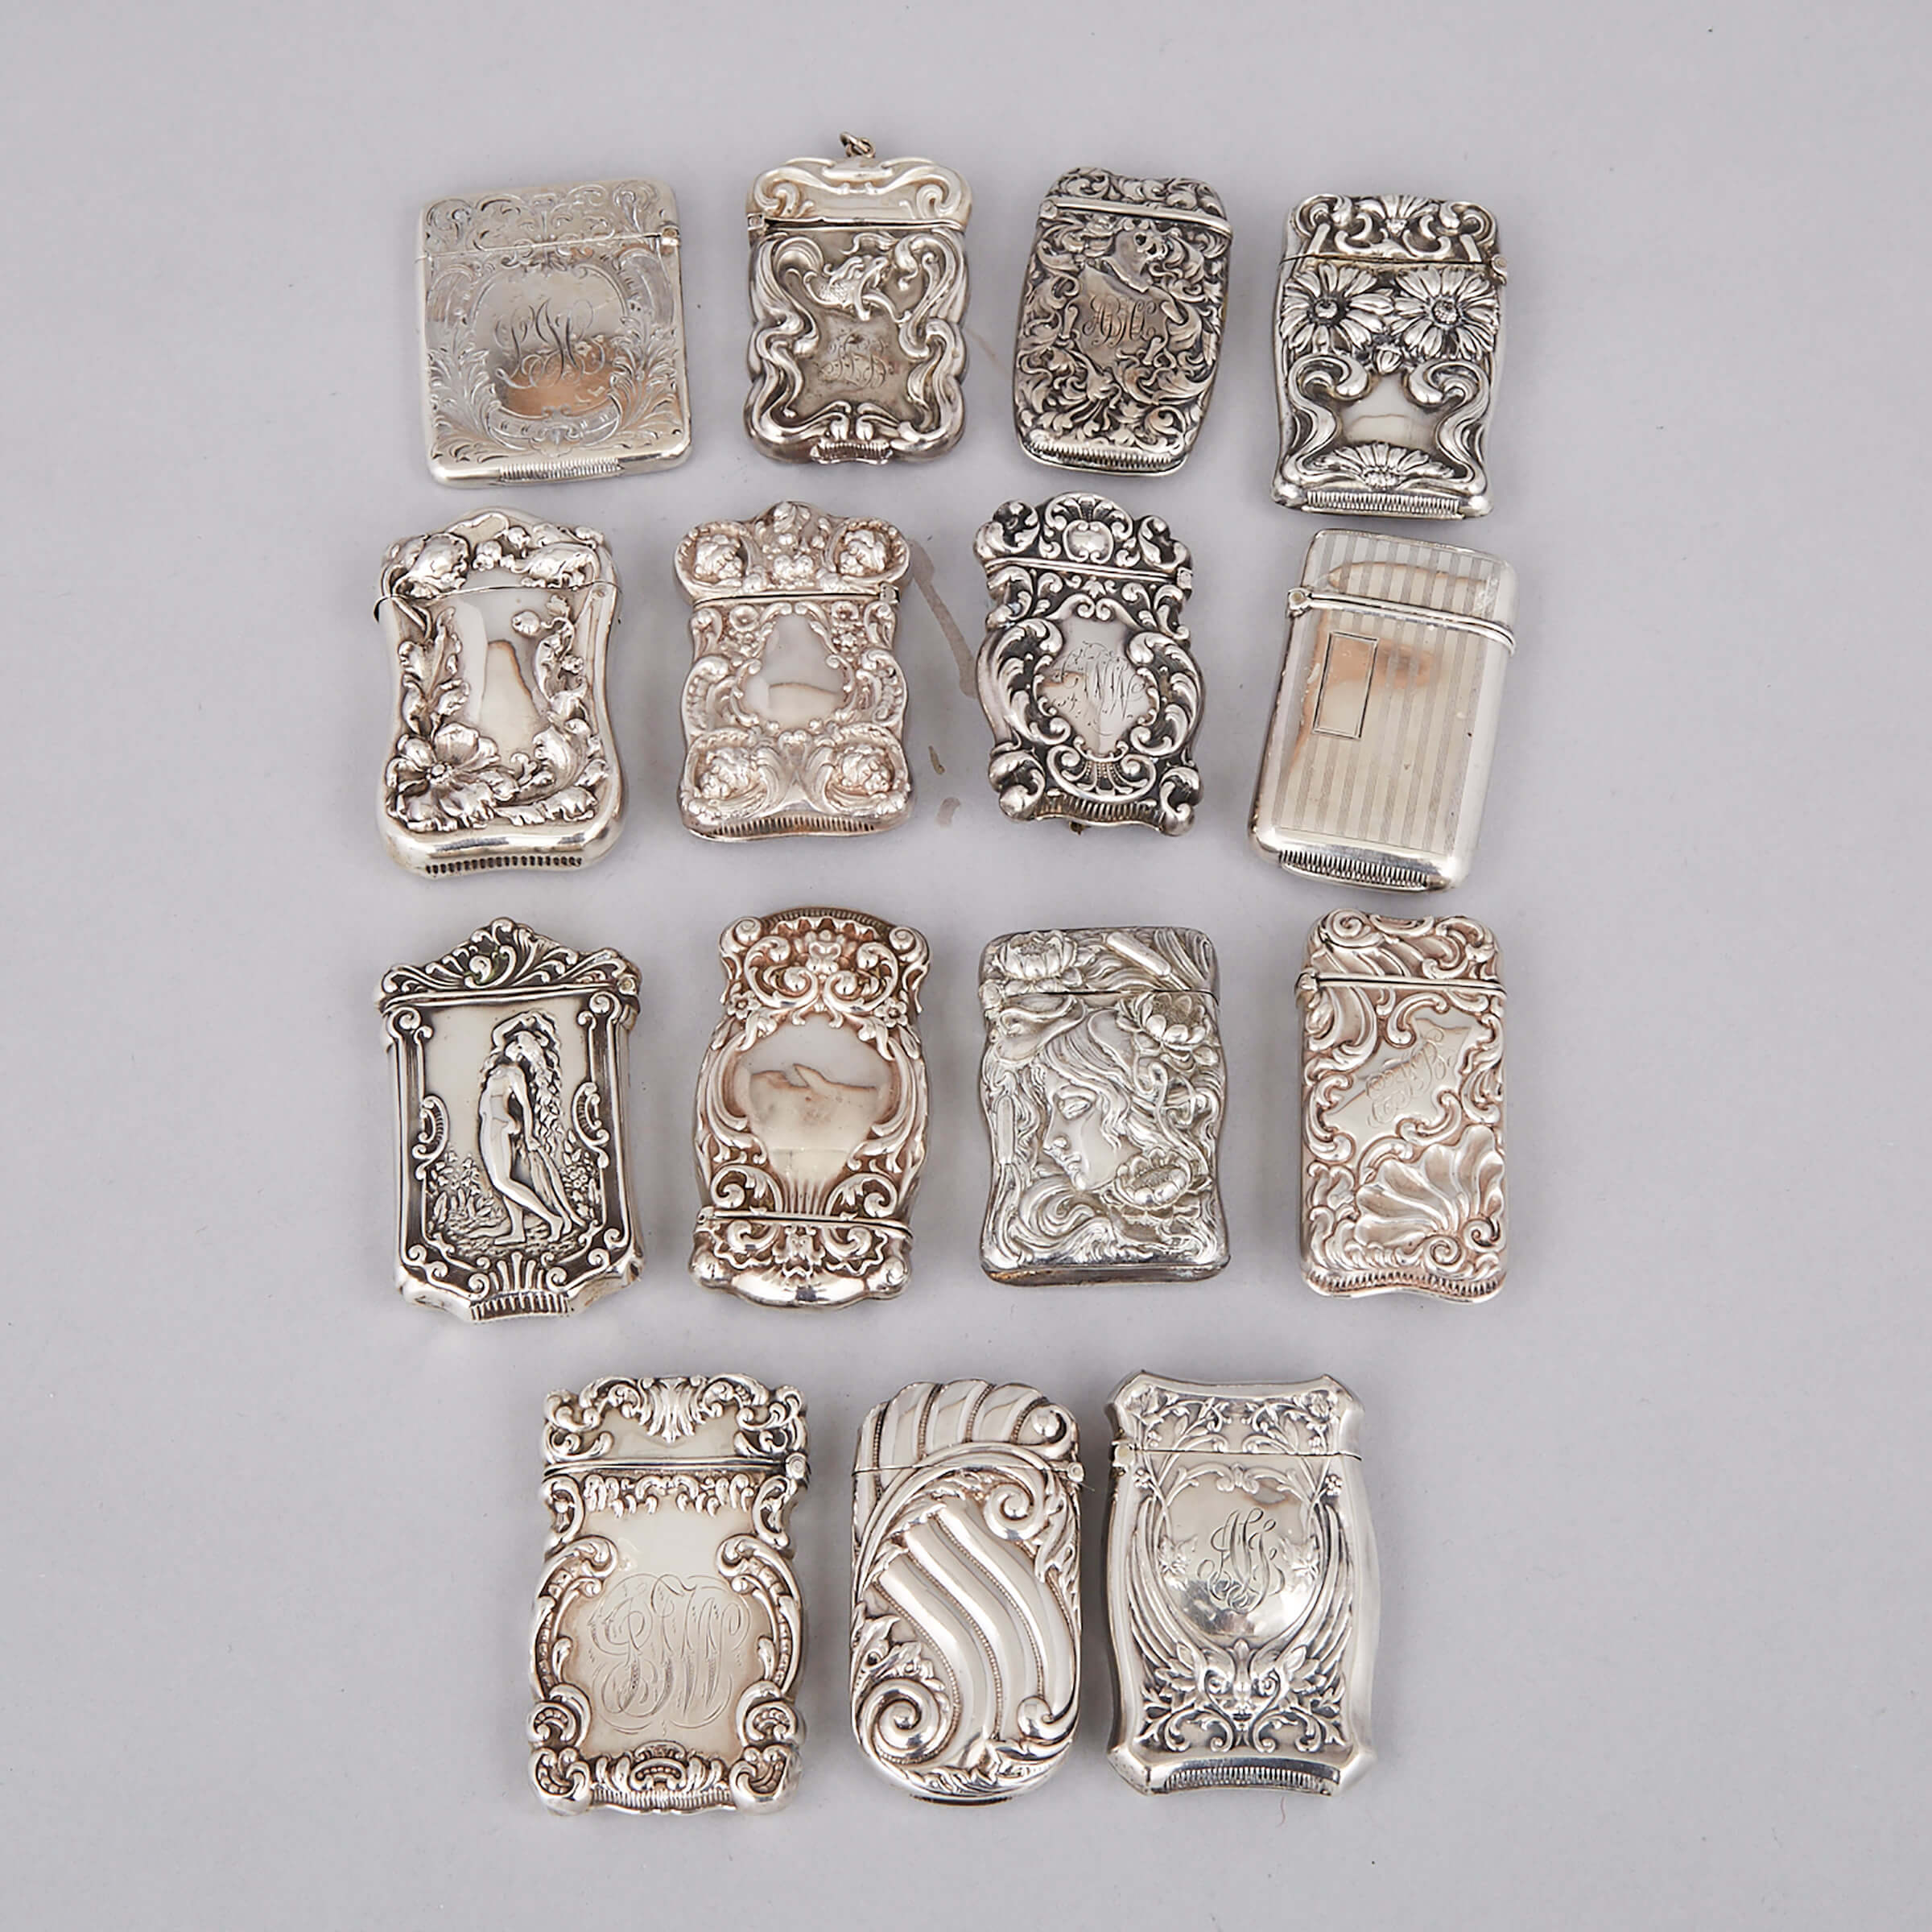 Fifteen North American Silver Vesta Cases, late 19th/early 20th century